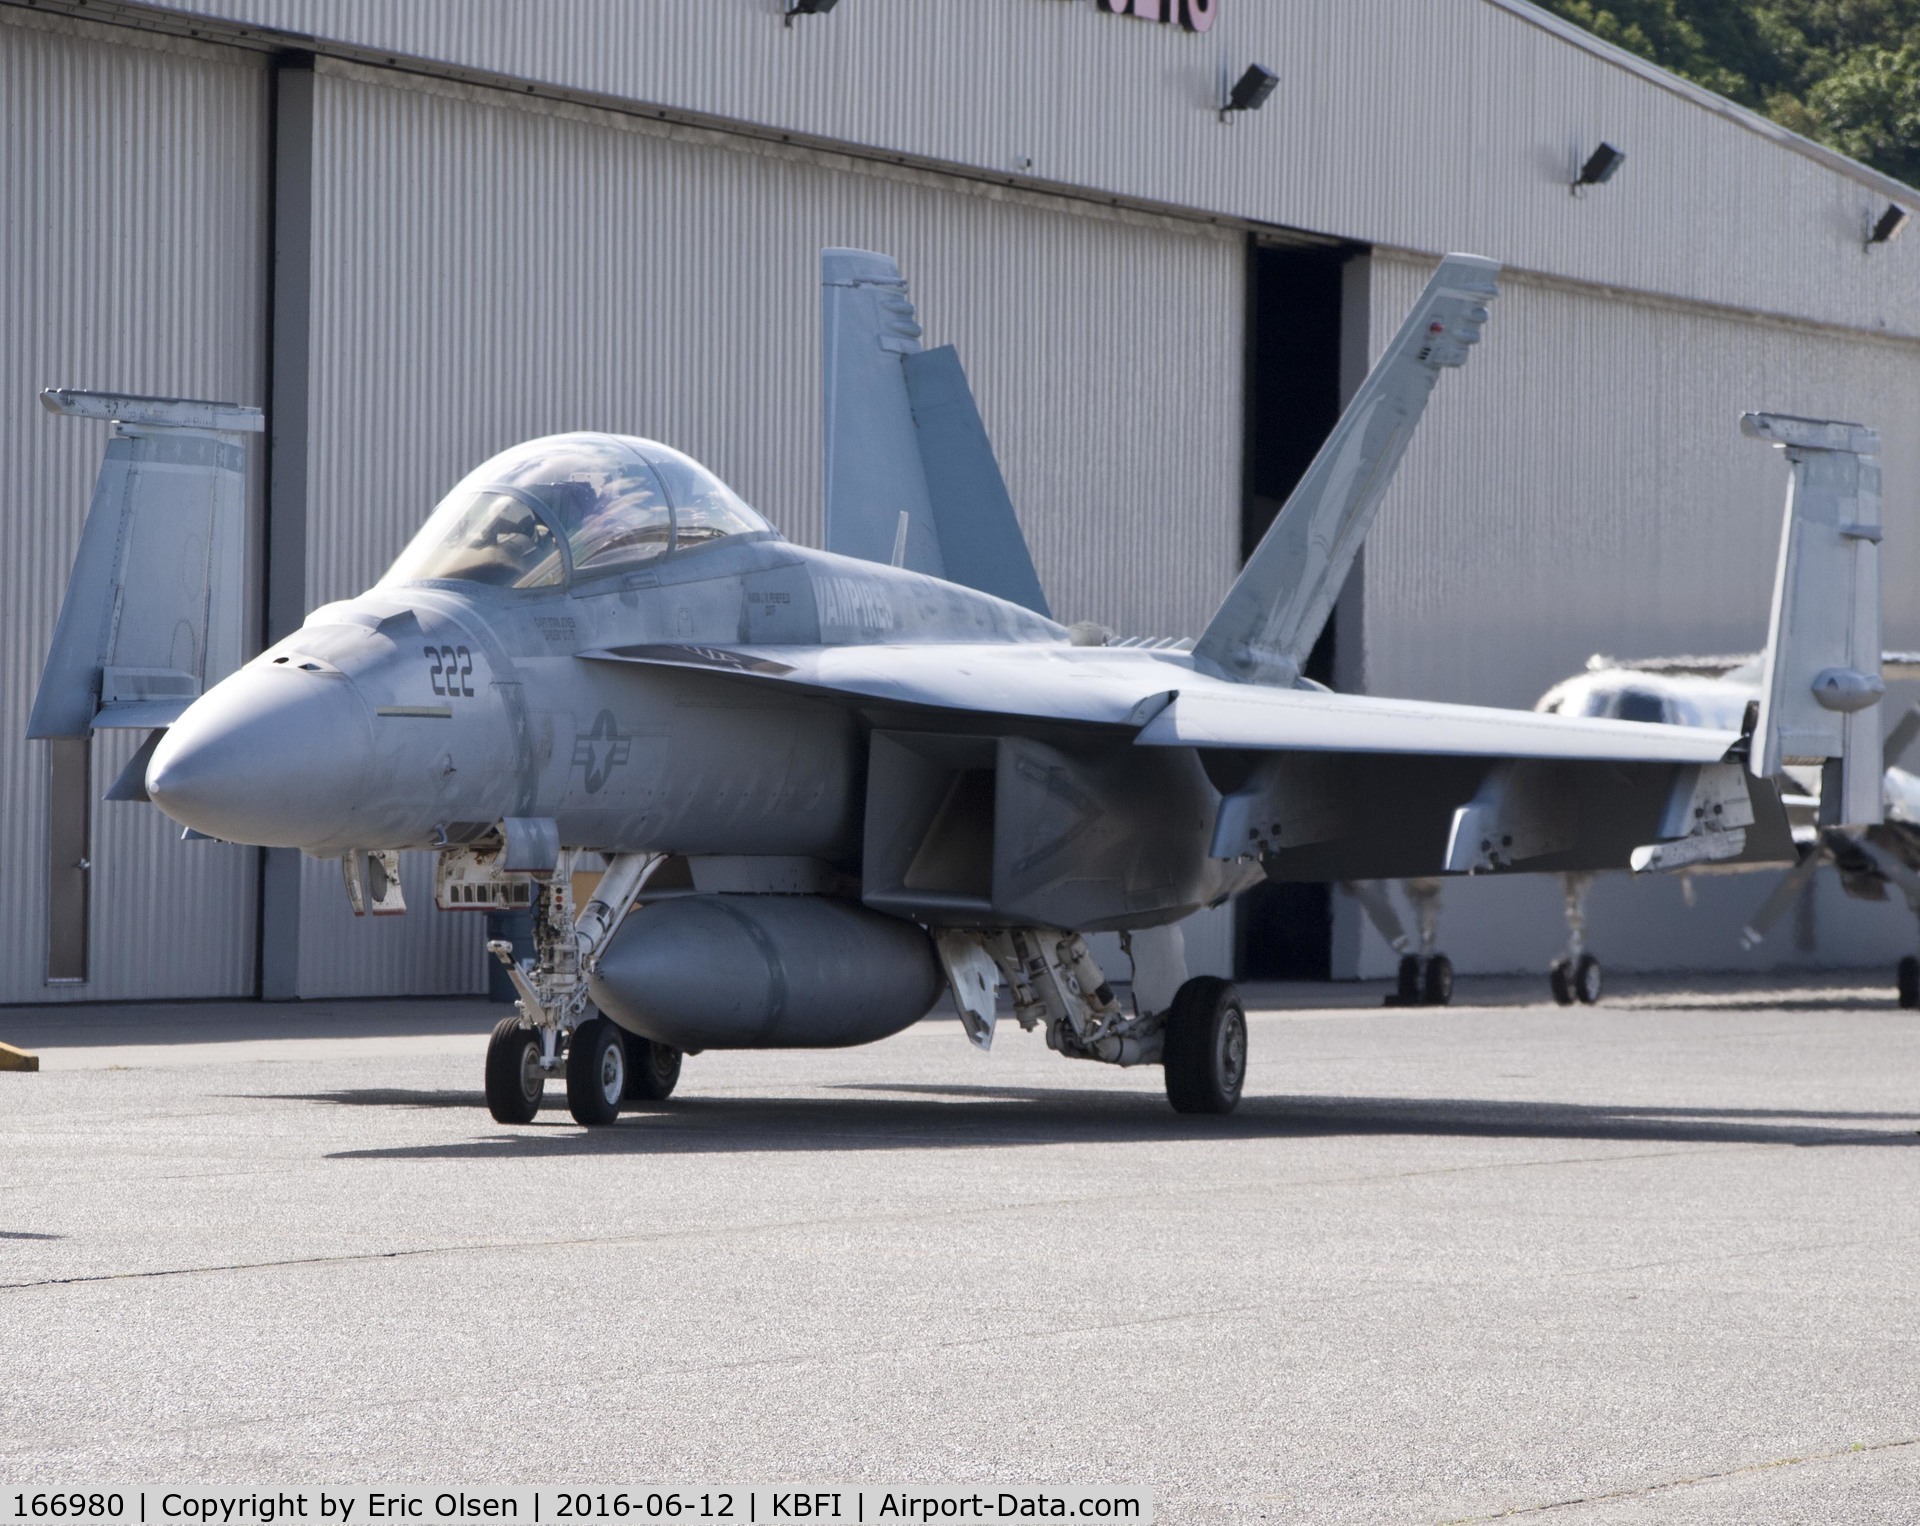 166980, Boeing F/A-18F Super Hornet C/N F255, XE-222 at Boeing Field